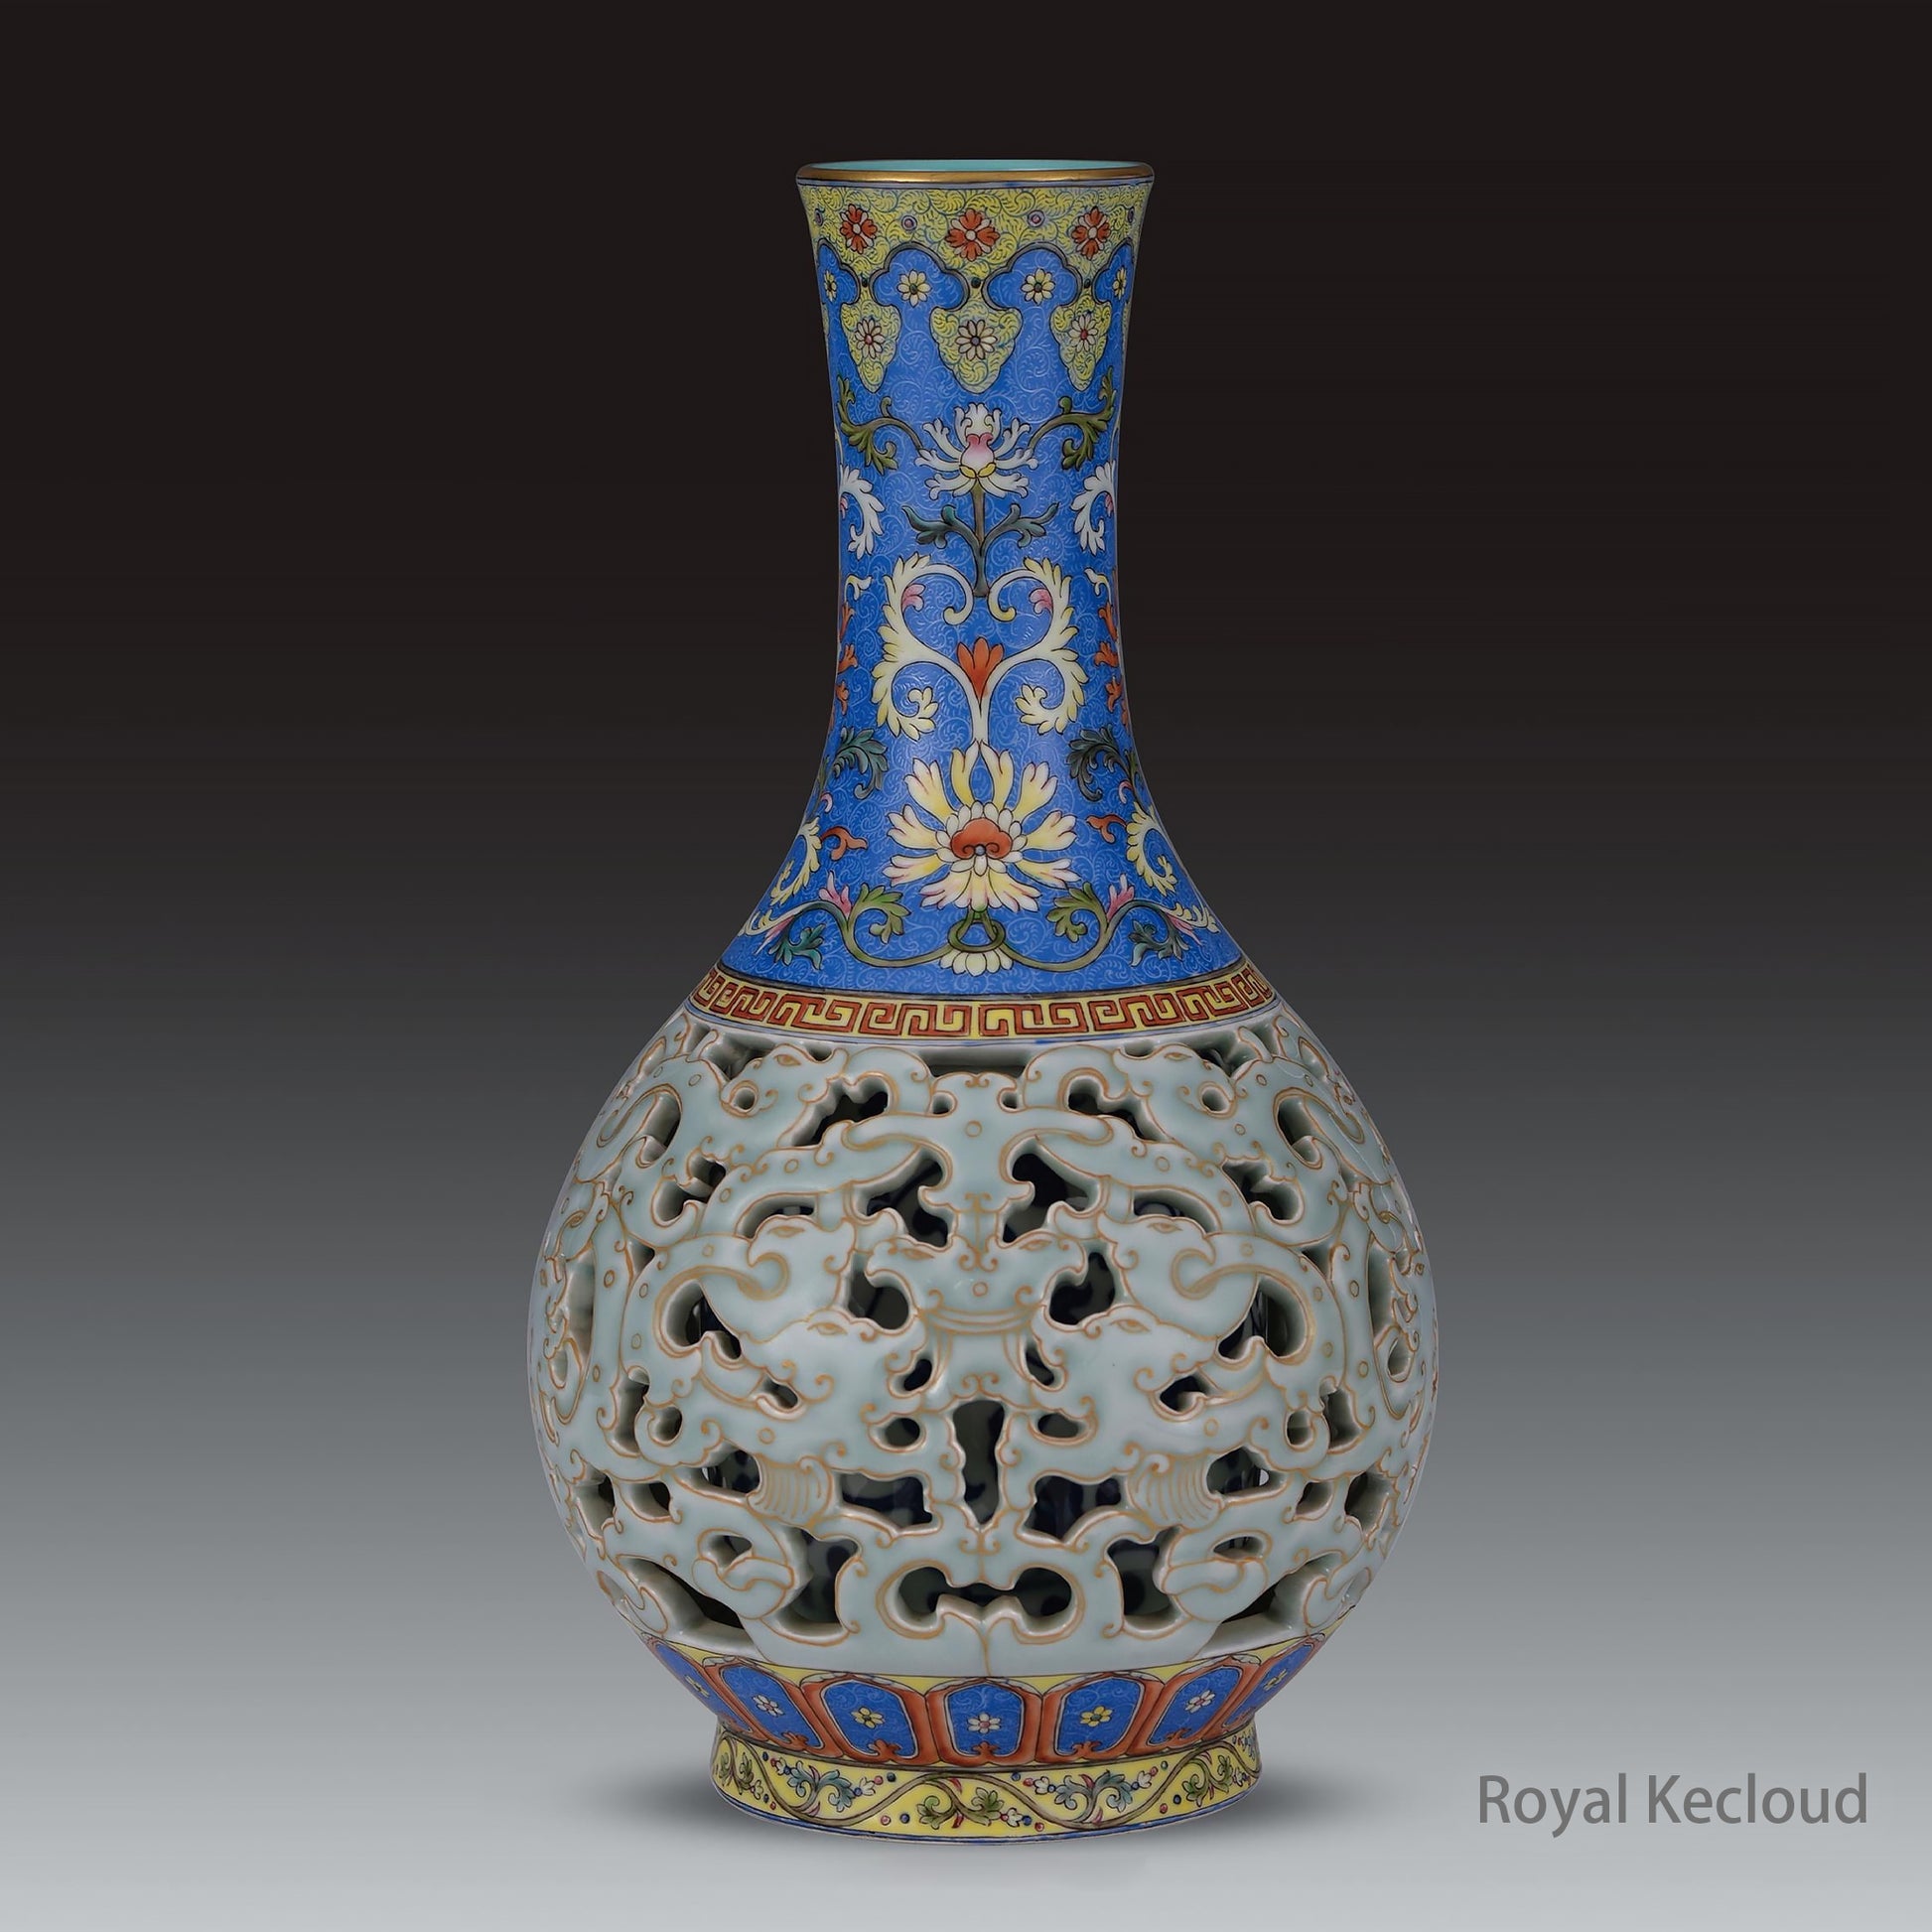 A Fine Chinese Famille-rose Reticulated Porcelain Vase